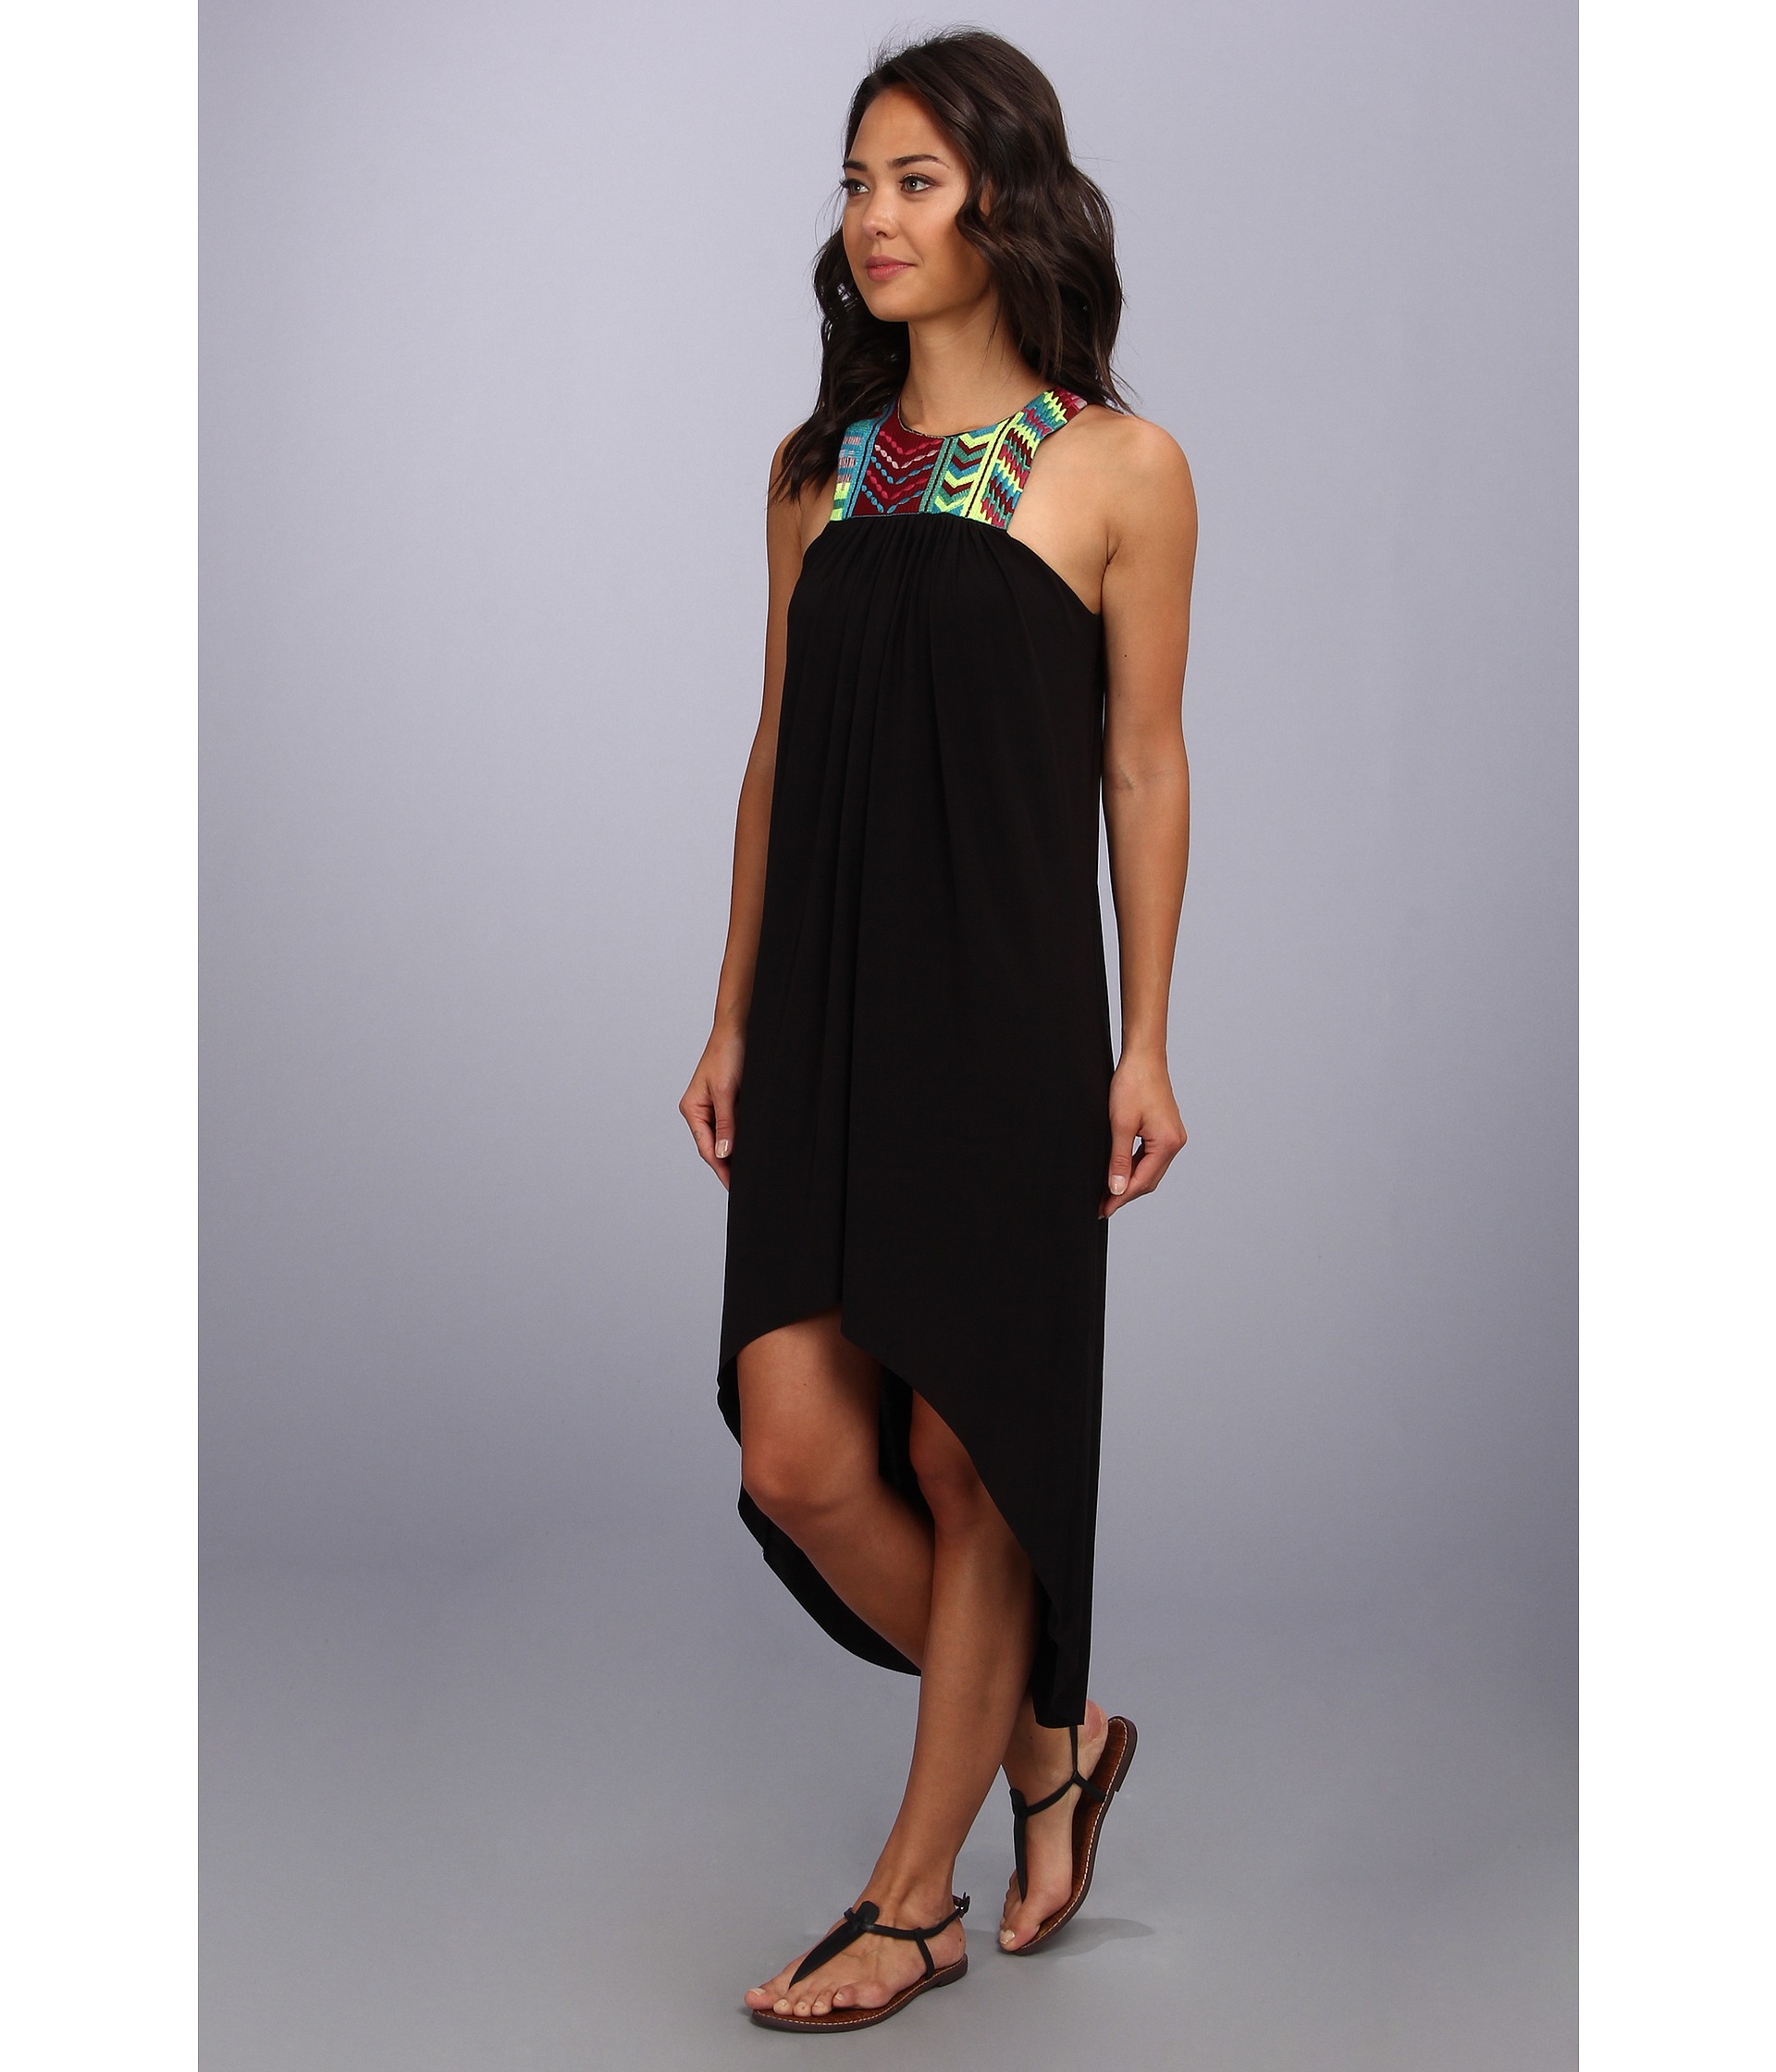 Tbags Los Angeles Sleeveless High Low Dress with Multicolored Trim